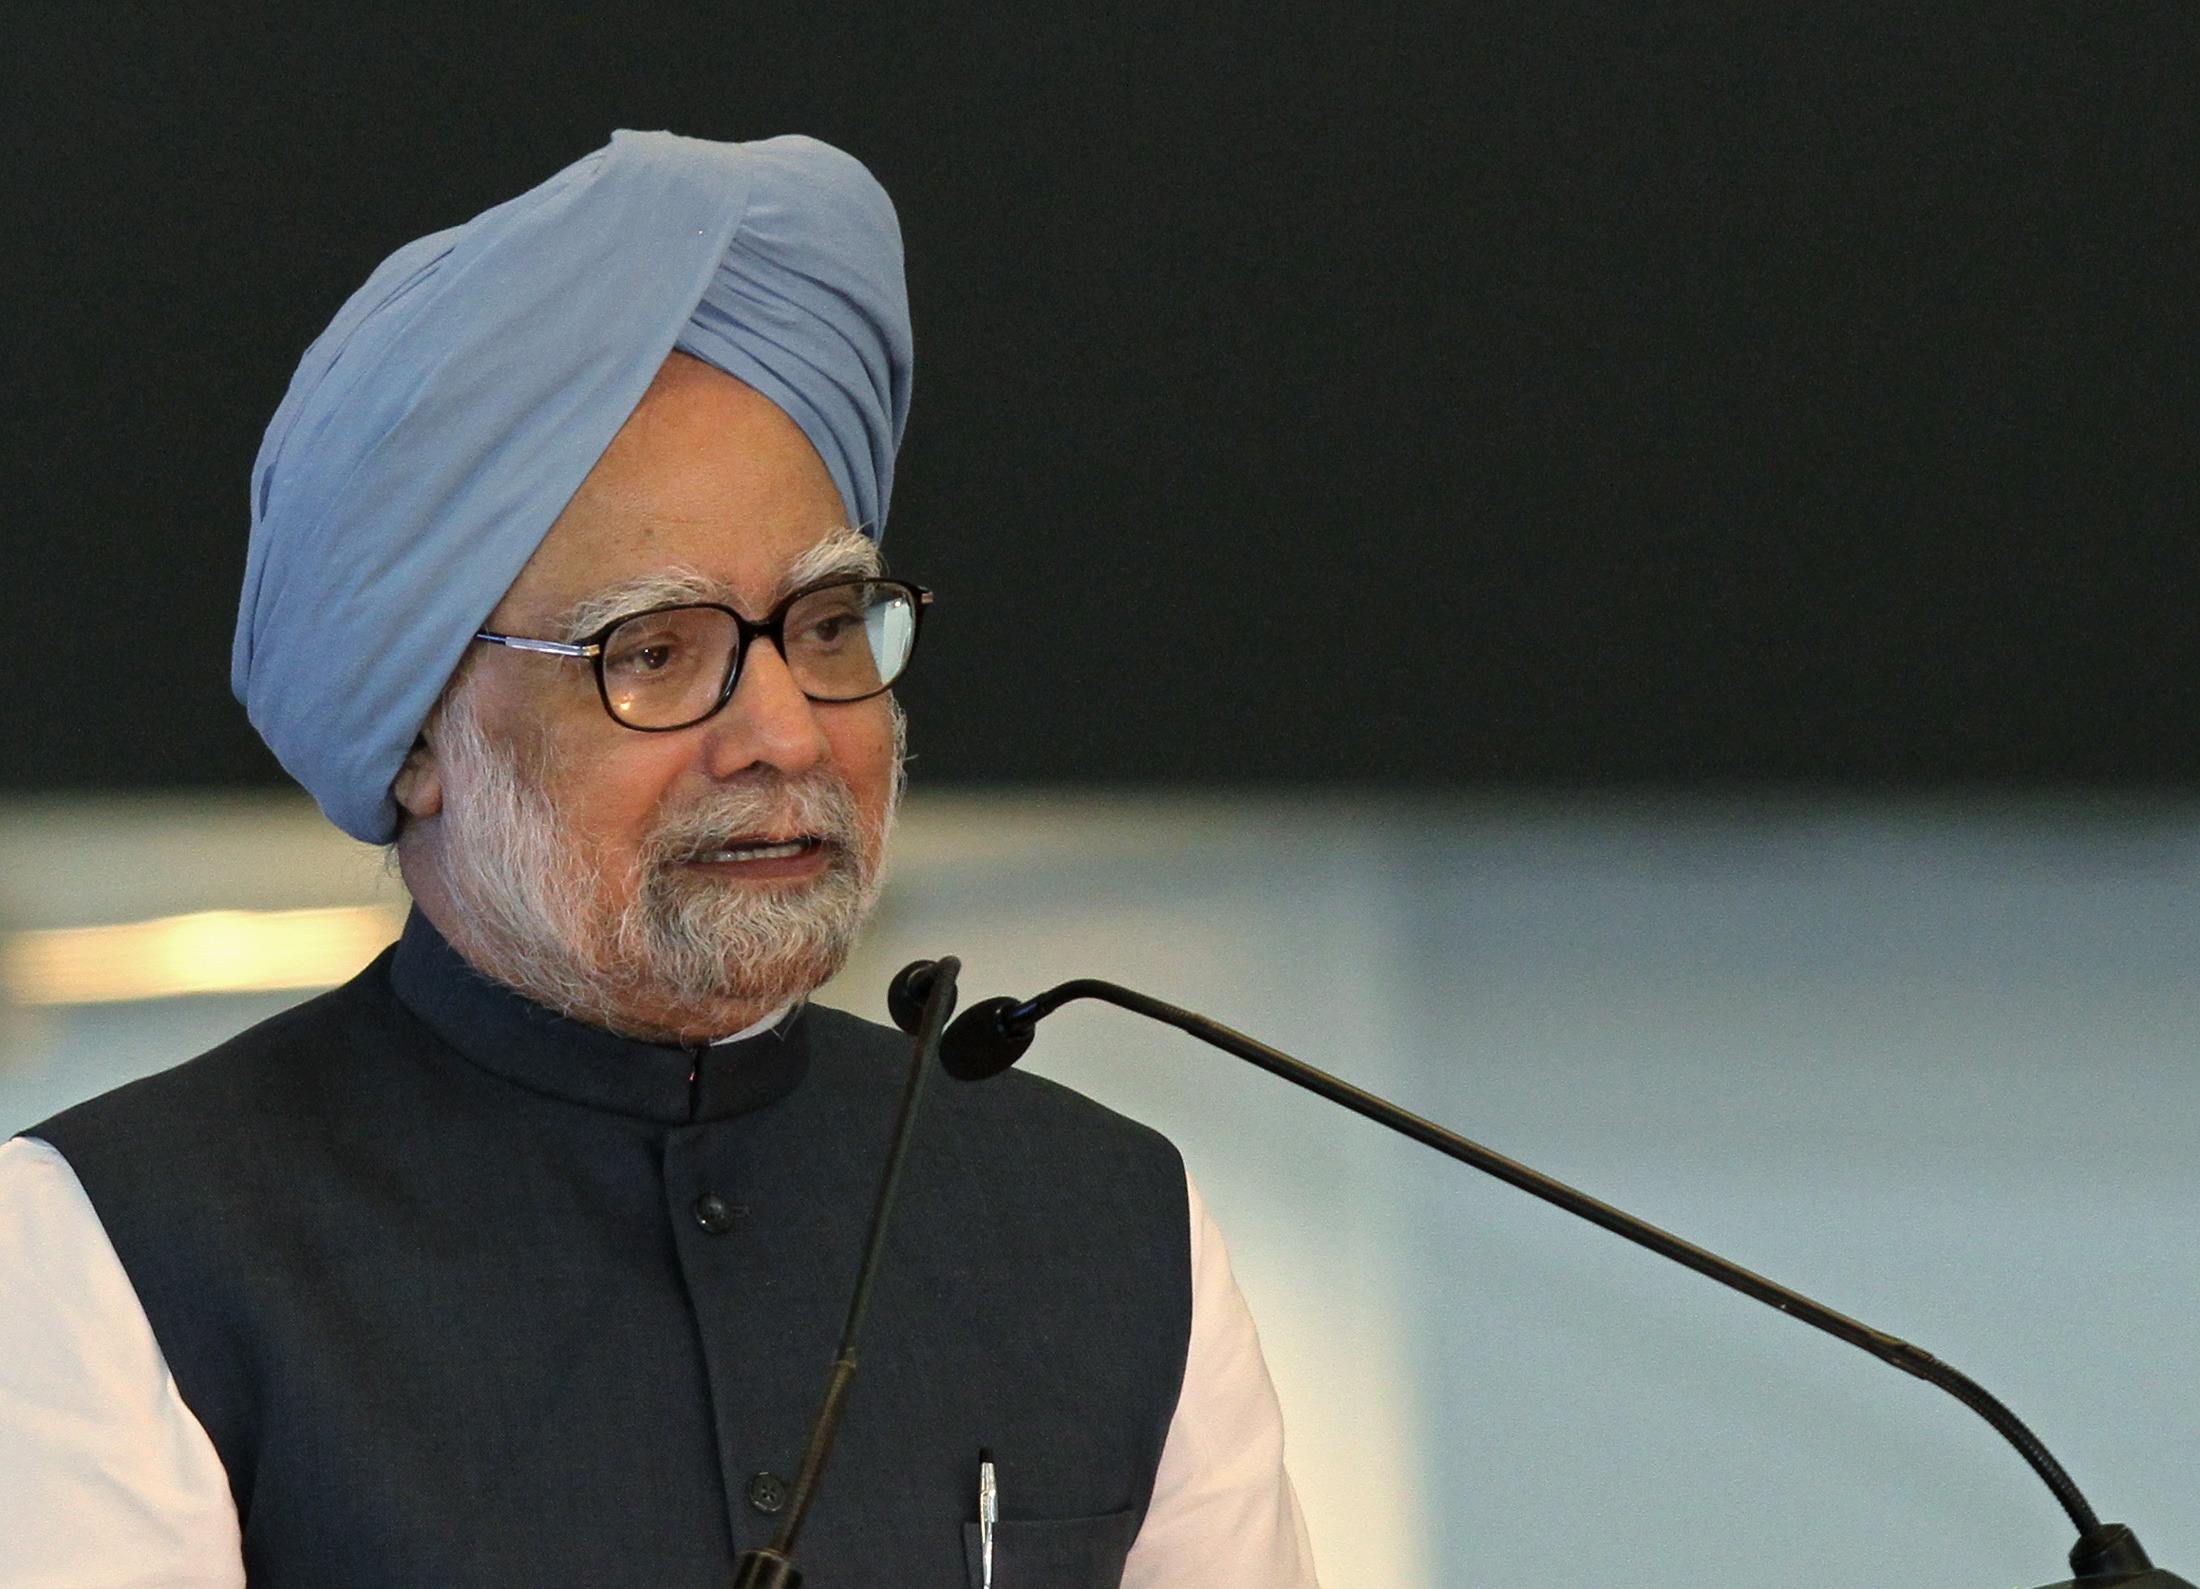 India's Prime Minister Manmohan Singh speaks during the inauguration ceremony of the newly constructed Terminal 3 at Indira Gandhi International Airport in New Delhi July 3, 2010. The terminal, one of the world's largest, was inaugurated by Singh on Saturday. REUTERS/B Mathur (INDIA - Tags: POLITICS BUSINESS TRANSPORT)